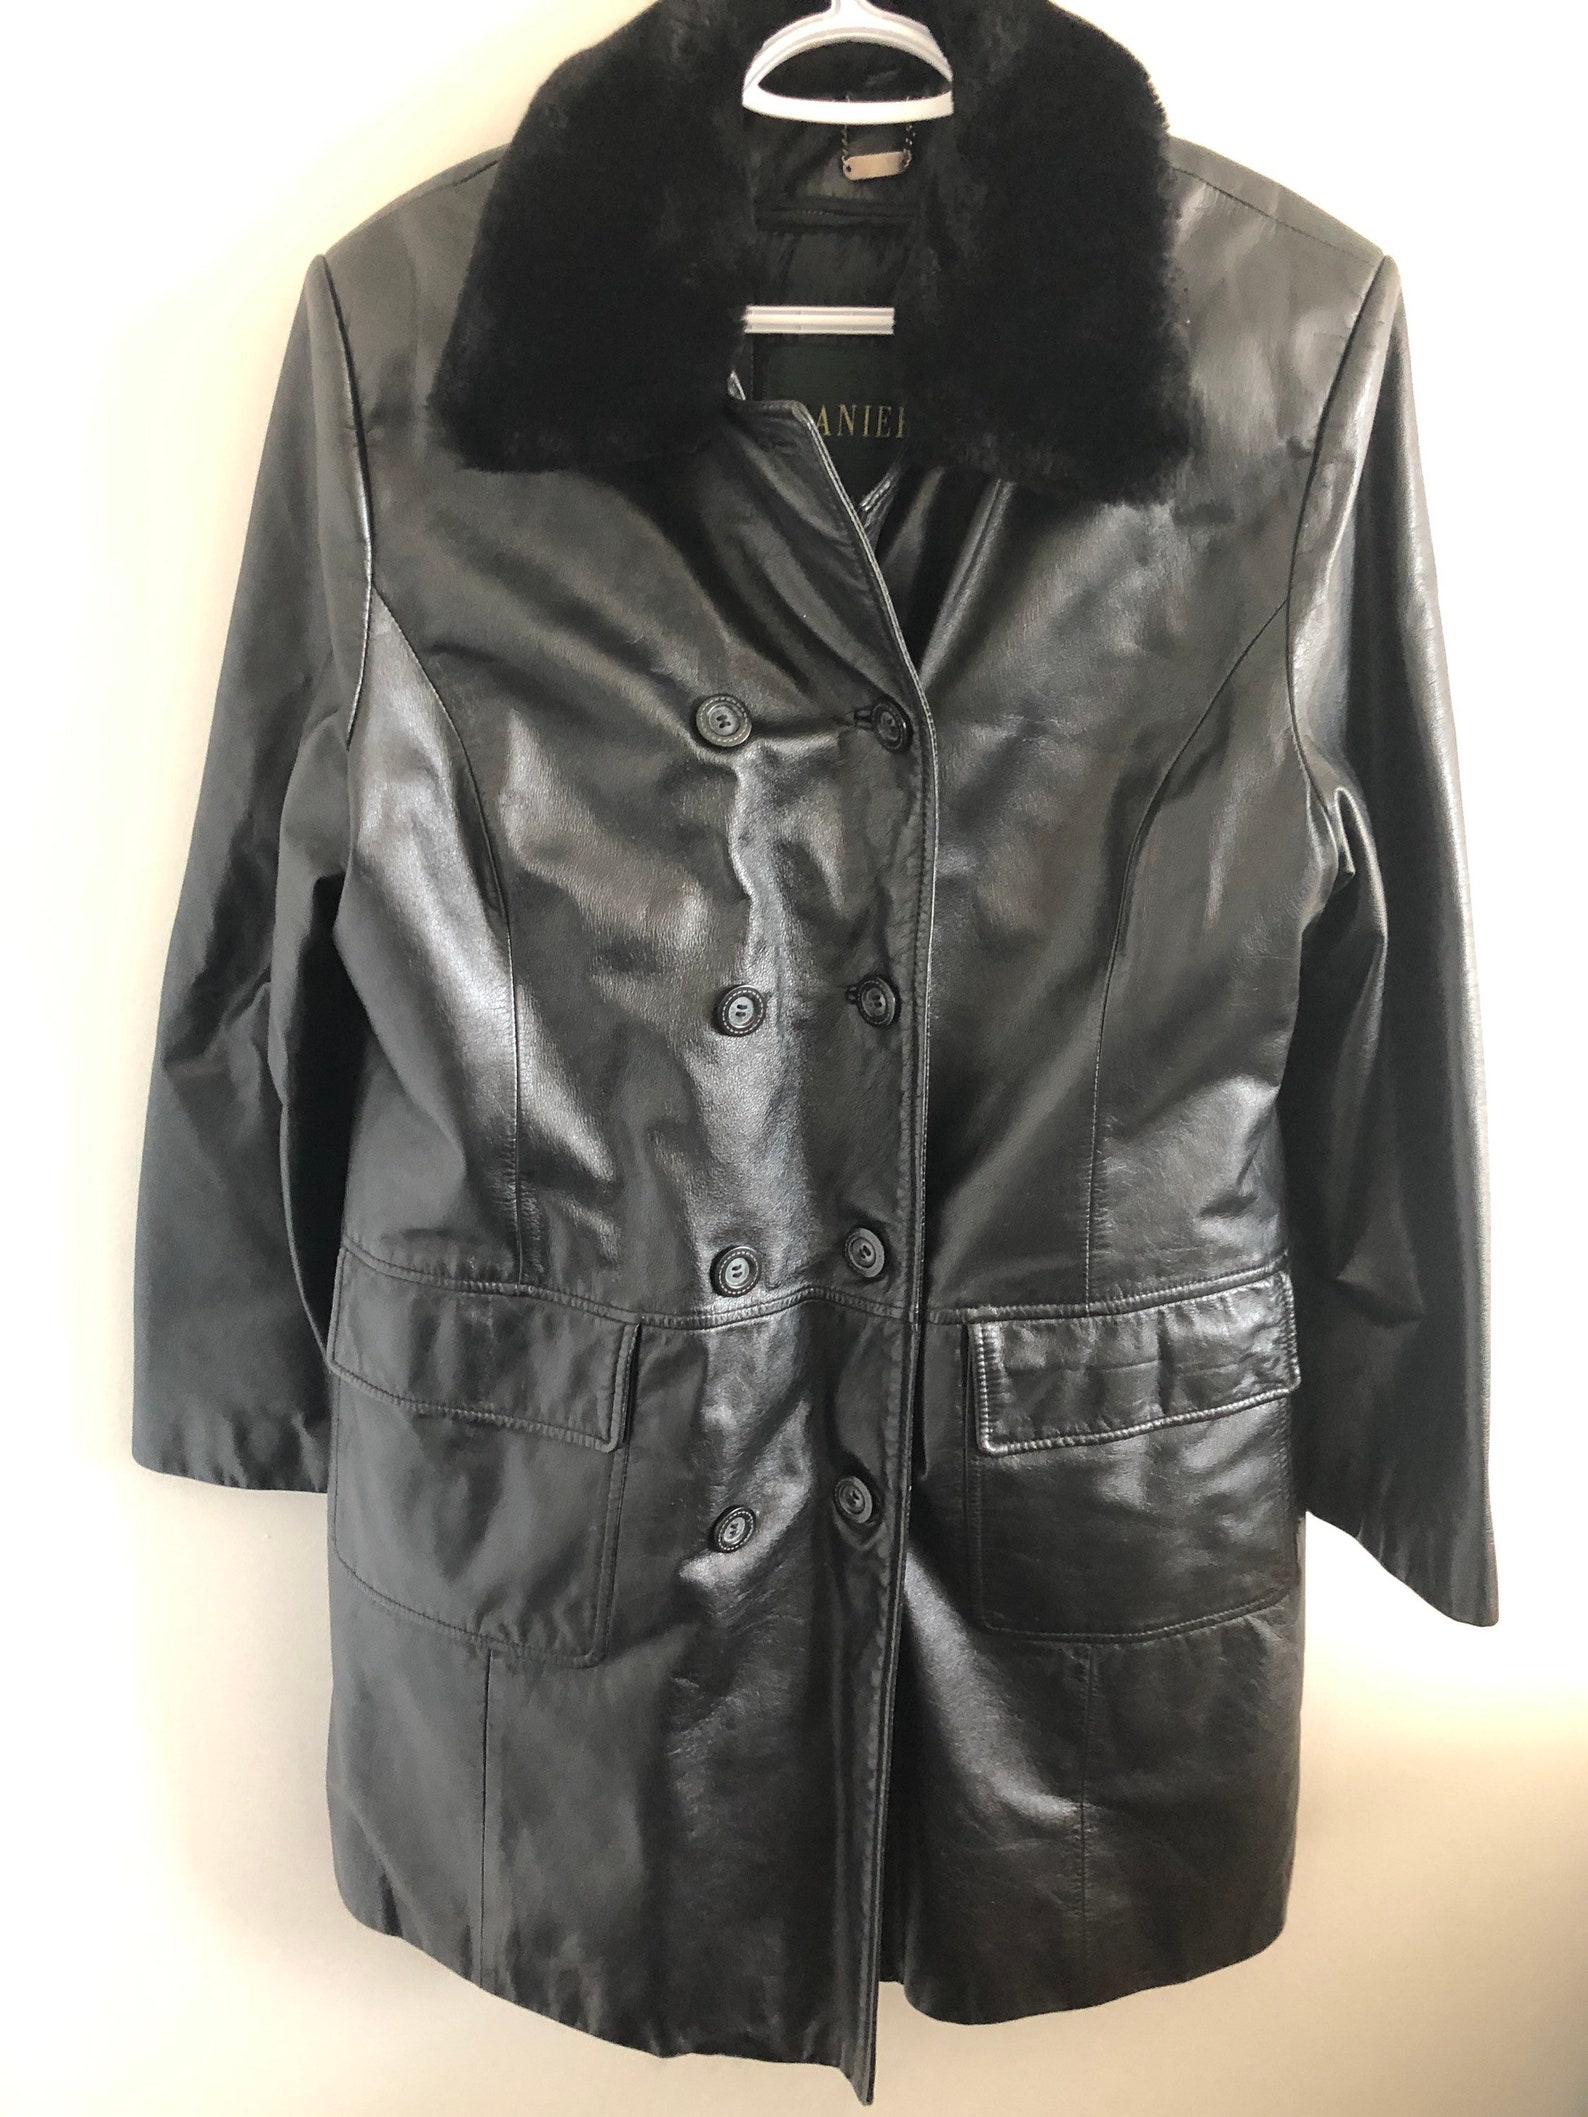 Long Danier Genuine Leather Jacket With Faux Fur Collar | Etsy